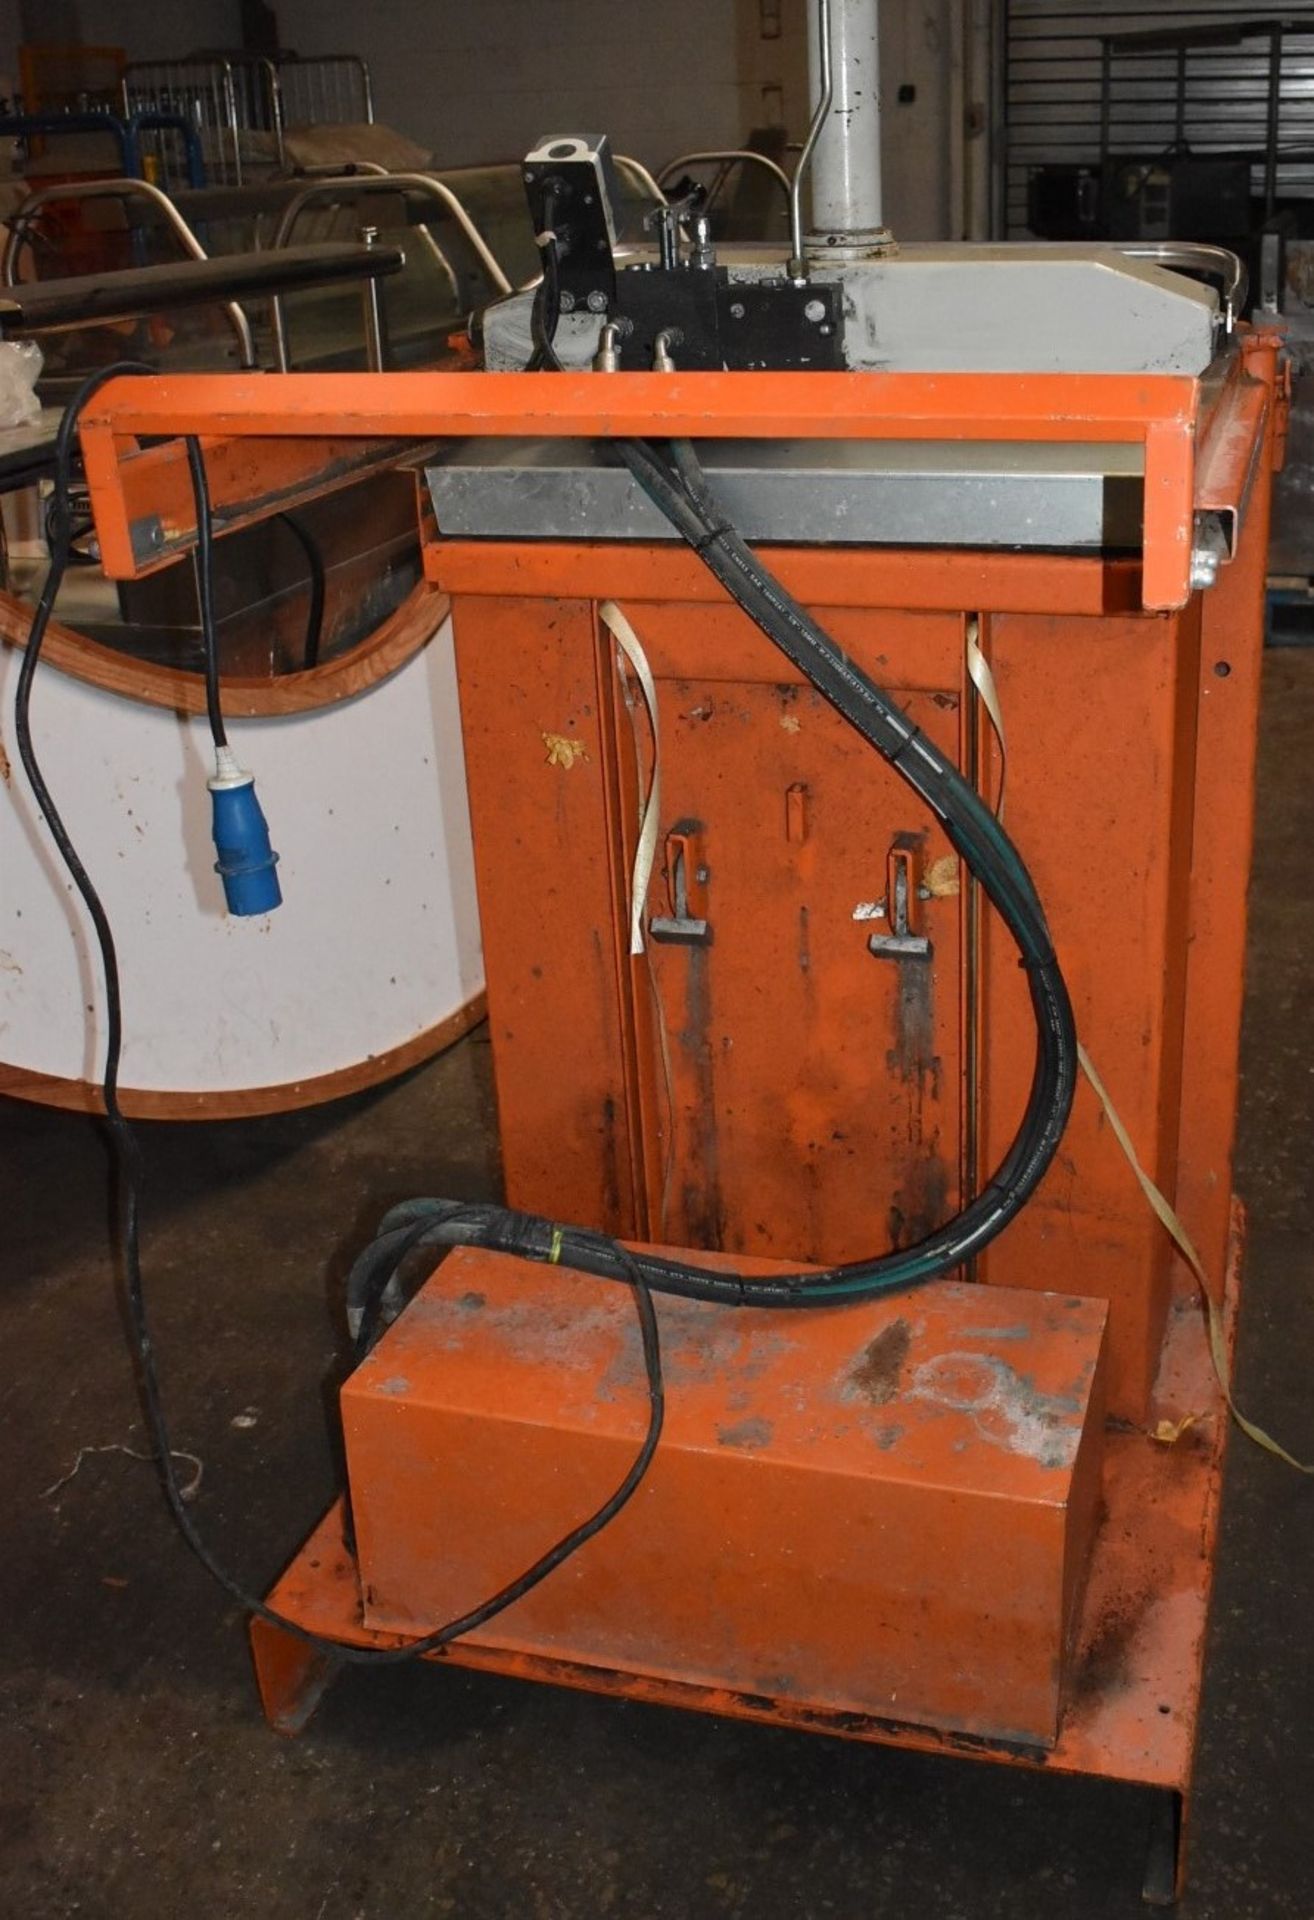 1 x Orwak 5010 Hydraulic Press Compact Cardboard Baler - Used For Compacting Recyclable or Non- - Image 14 of 15